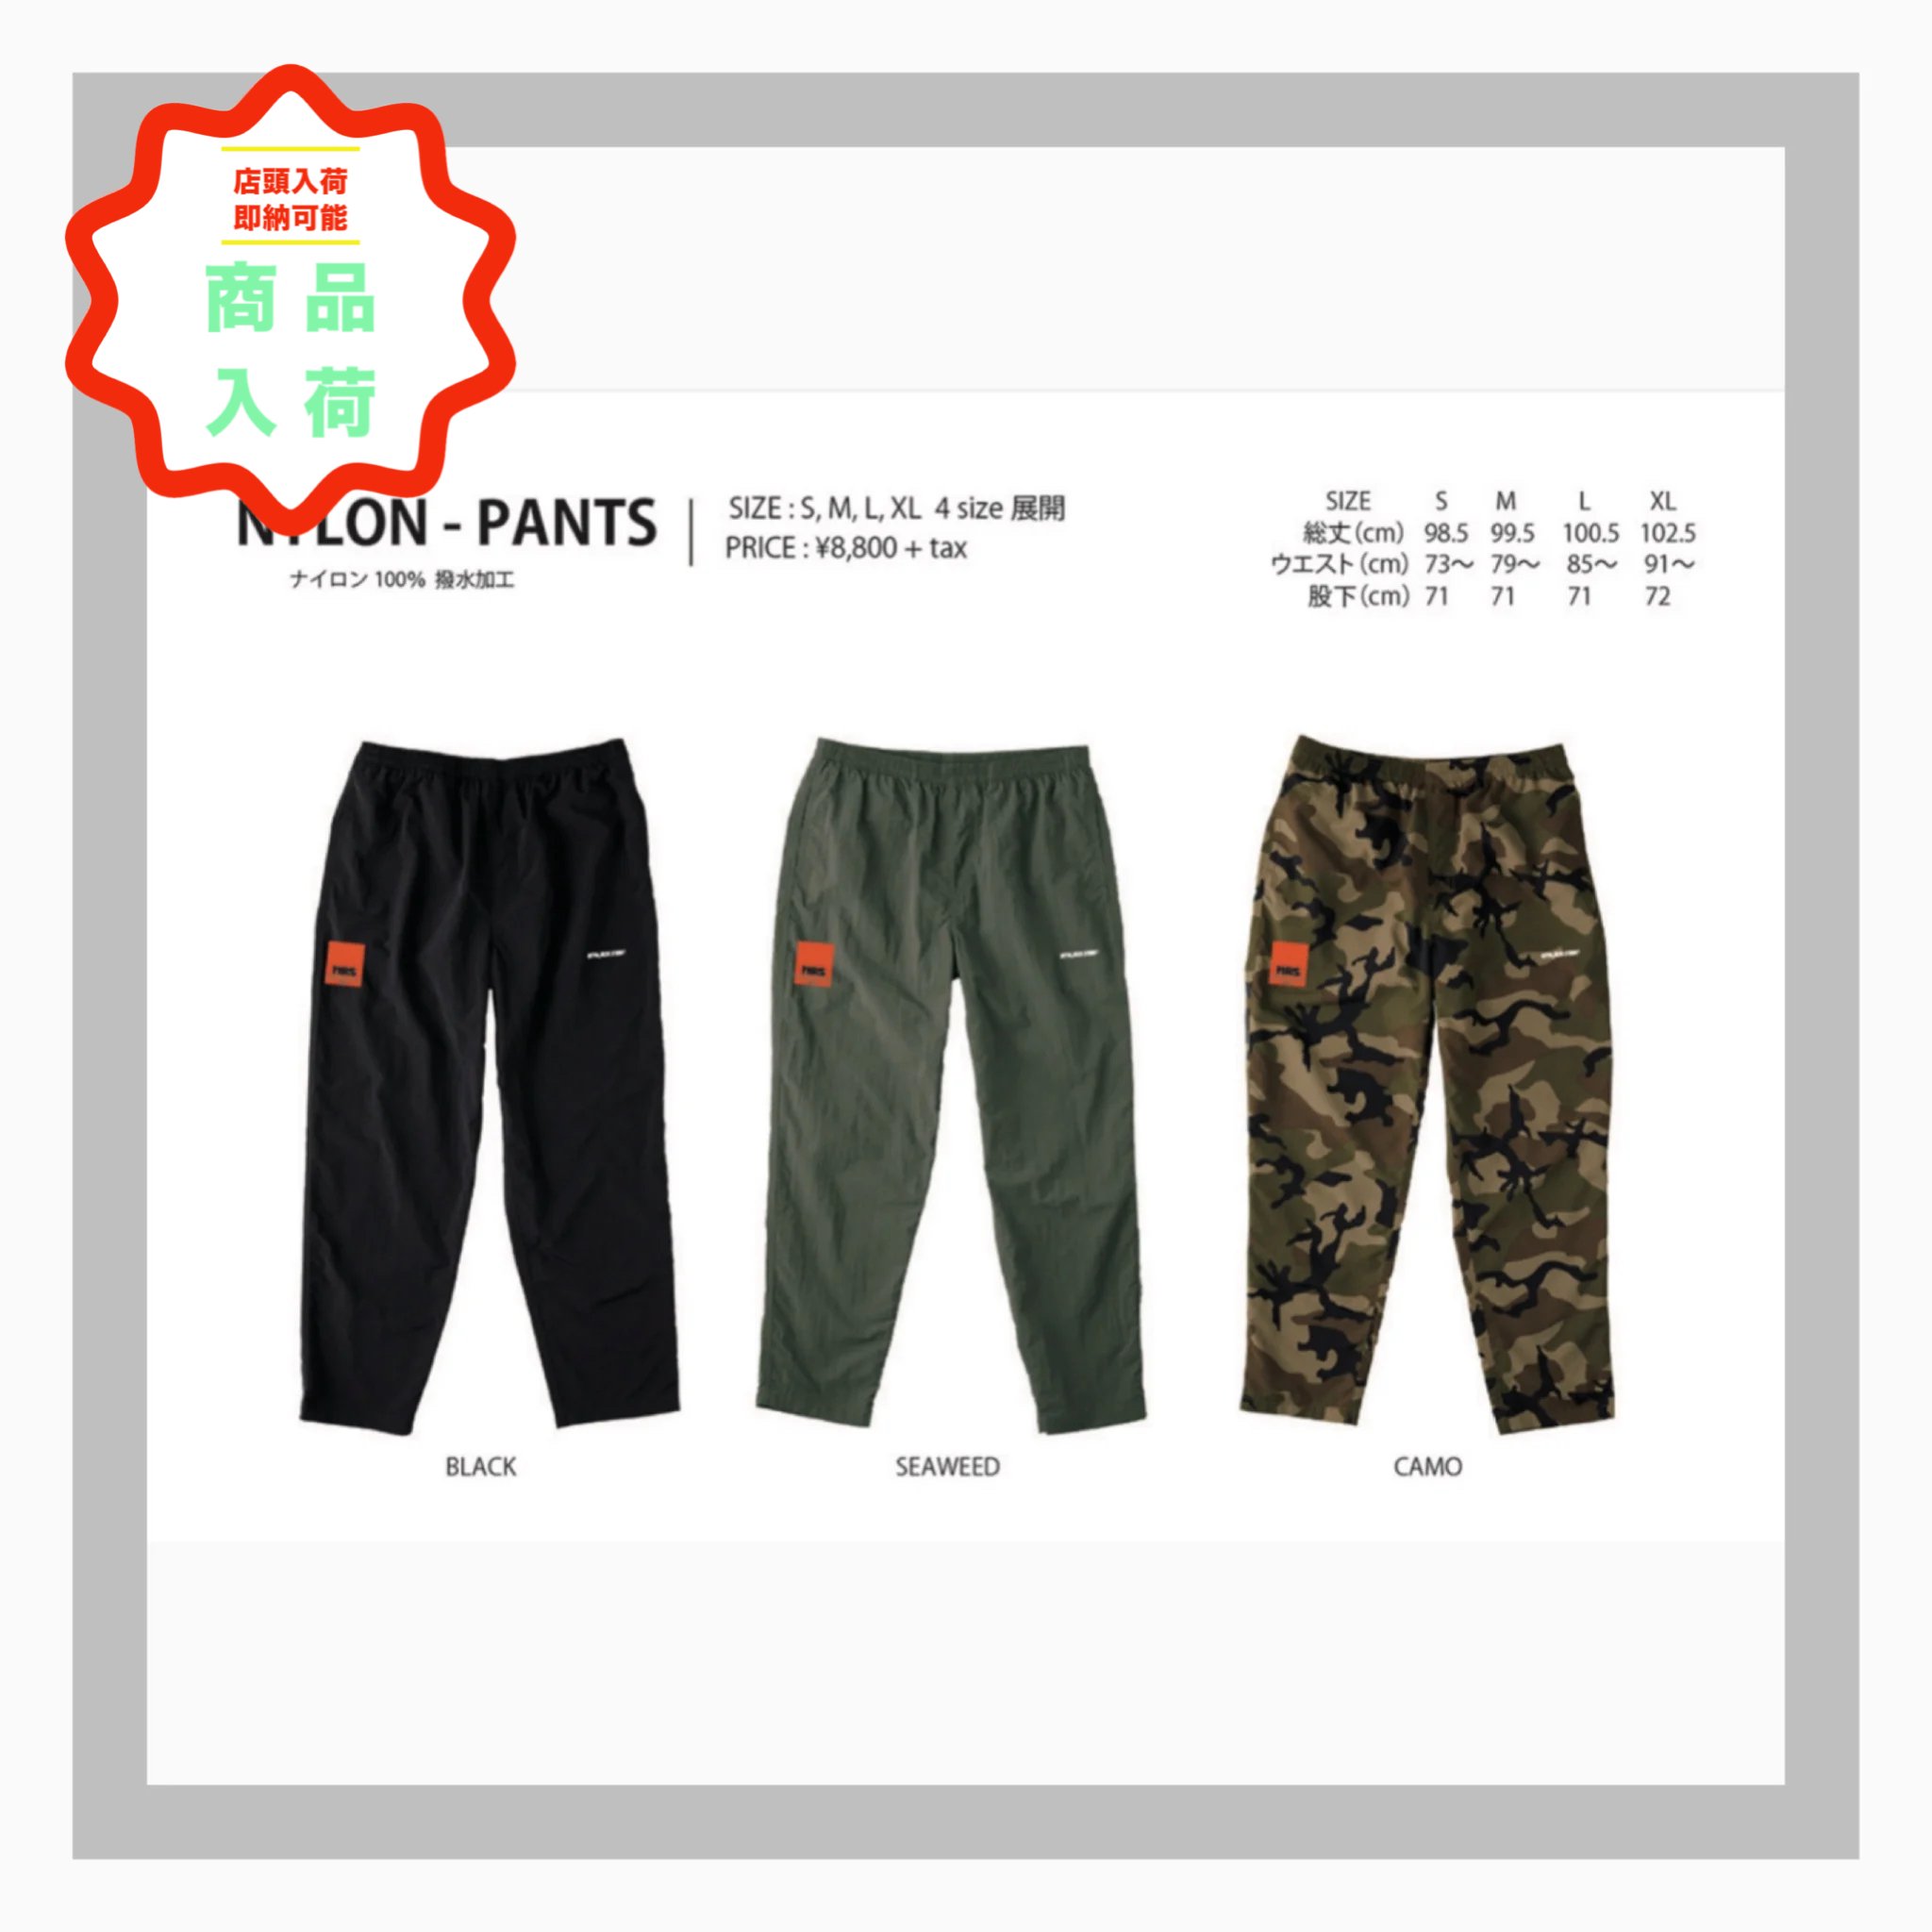 <img class='new_mark_img1' src='https://img.shop-pro.jp/img/new/icons14.gif' style='border:none;display:inline;margin:0px;padding:0px;width:auto;' />MOUNTAIN ROCK STAR HIGH SUMMER Apparel NYLON - PANTS